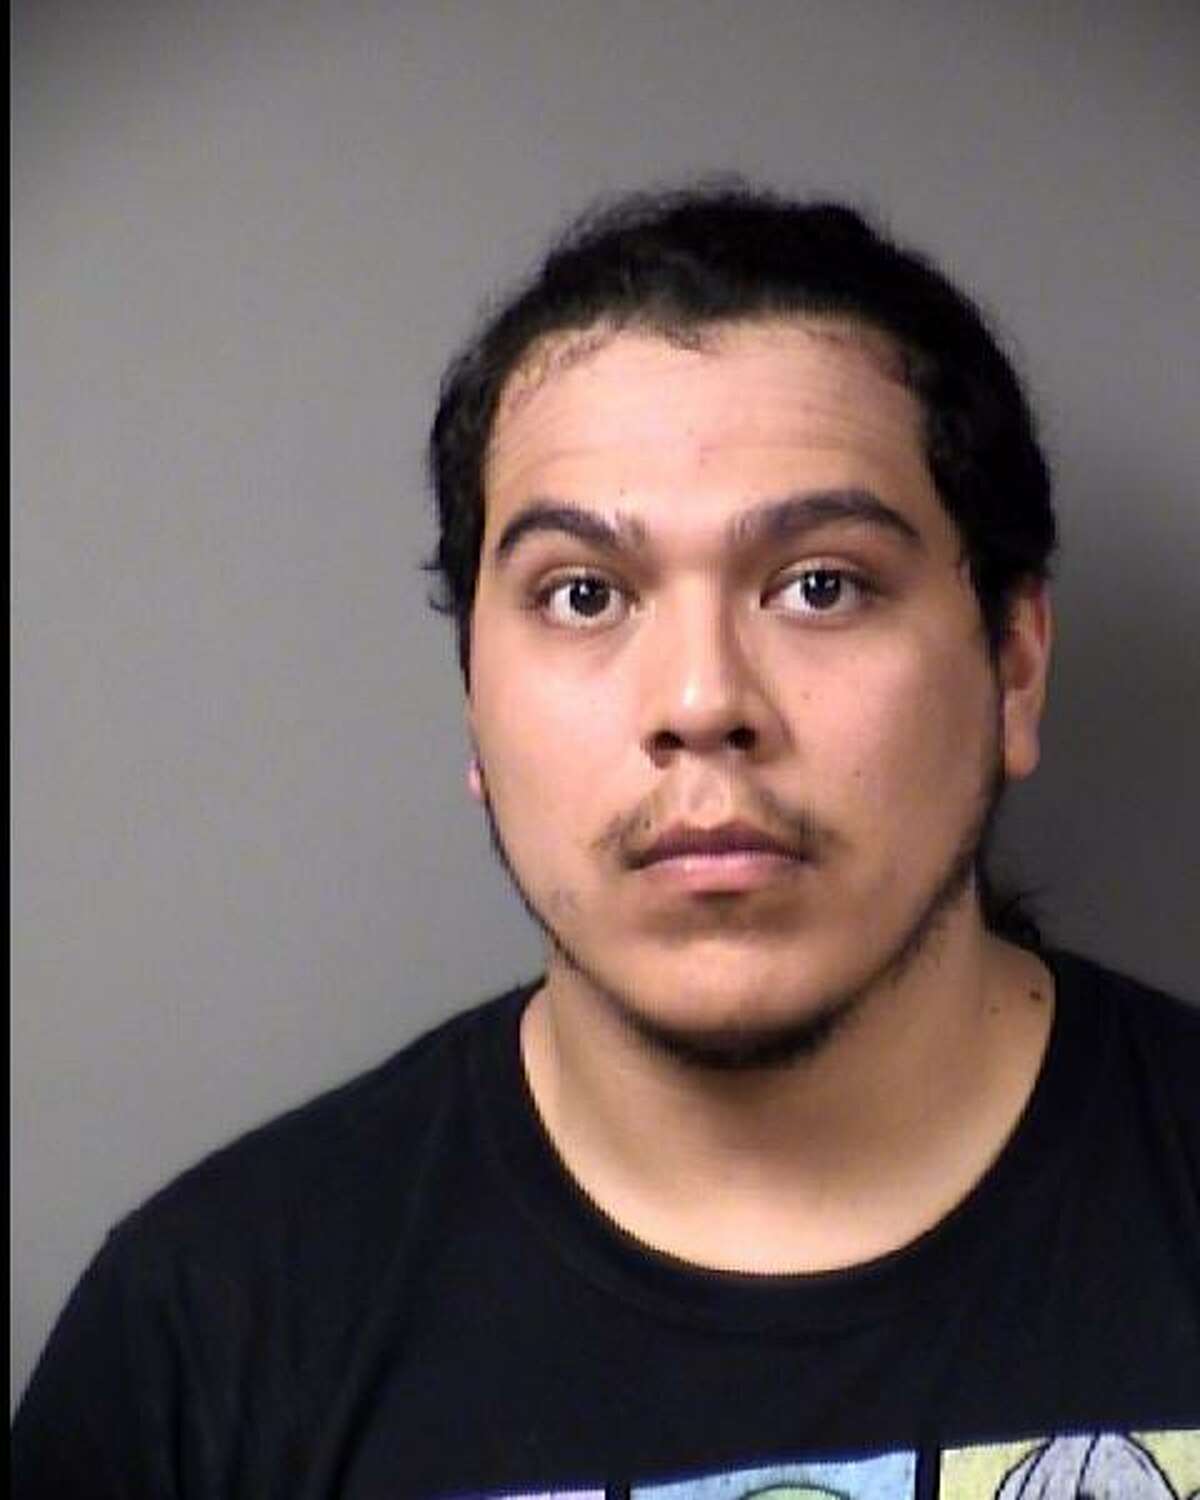 Derek Reyes, 27, was charged with two counts of intoxication manslaughter, accused of causing a car crash that killed two people on Jan. 17, 2022.